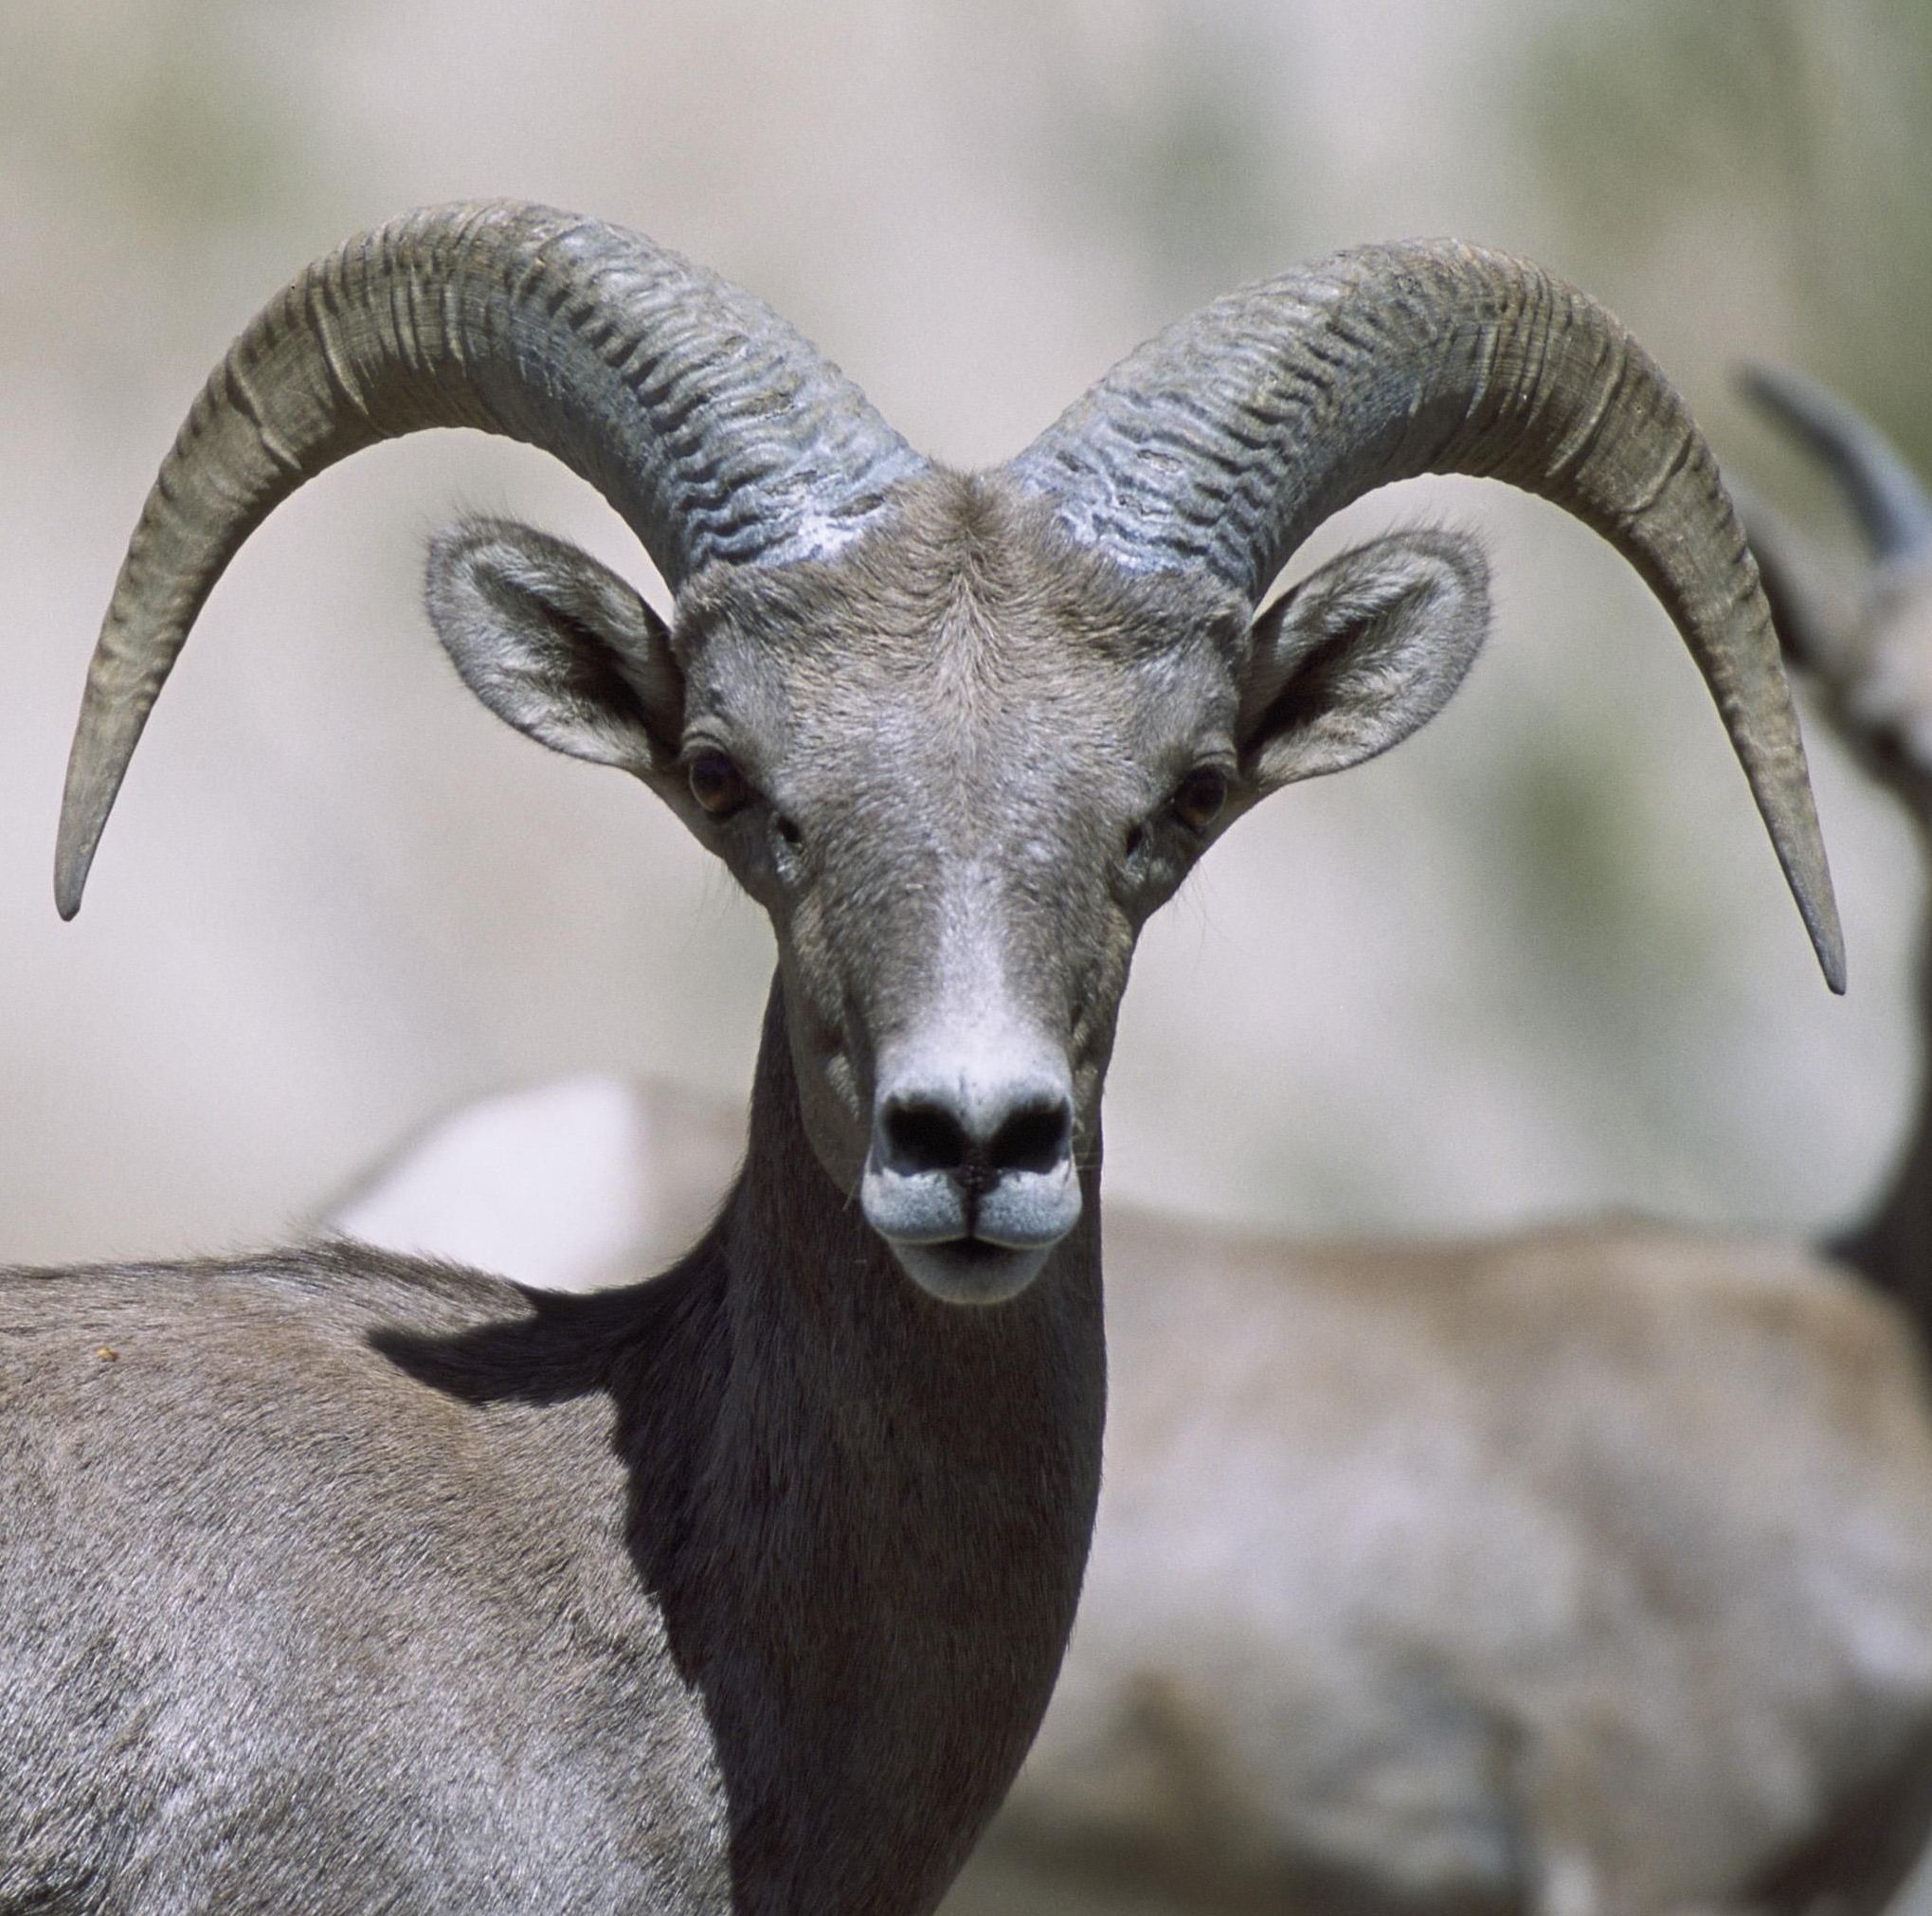 Female bighorn sheep cropped Wiki Commons image